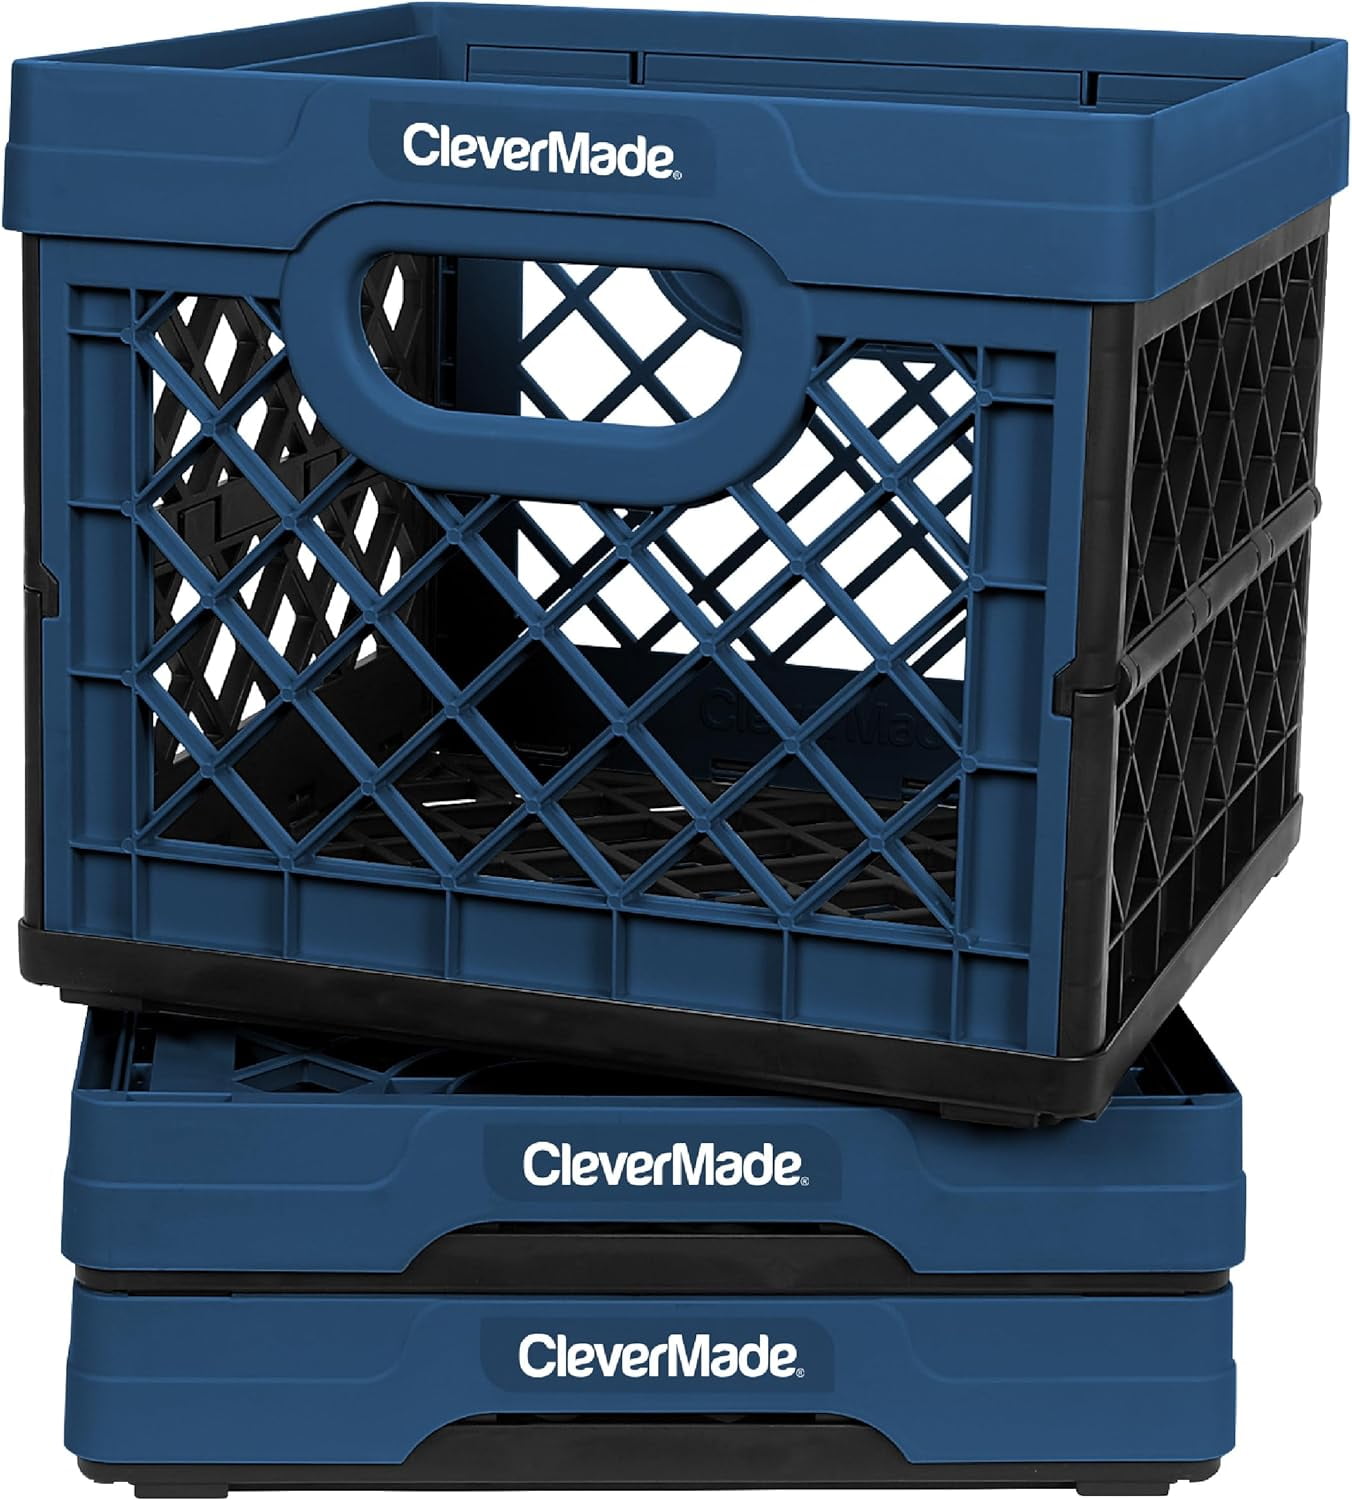  CleverMade Collapsible Utility Crate, Black, 3PK - 45L (11 Gal)  Collapsible Storage Bins, Holds 66lbs Per Bin - Plastic Stackable Grated  Wall Utility Containers, CleverCrates Baskets : Home & Kitchen